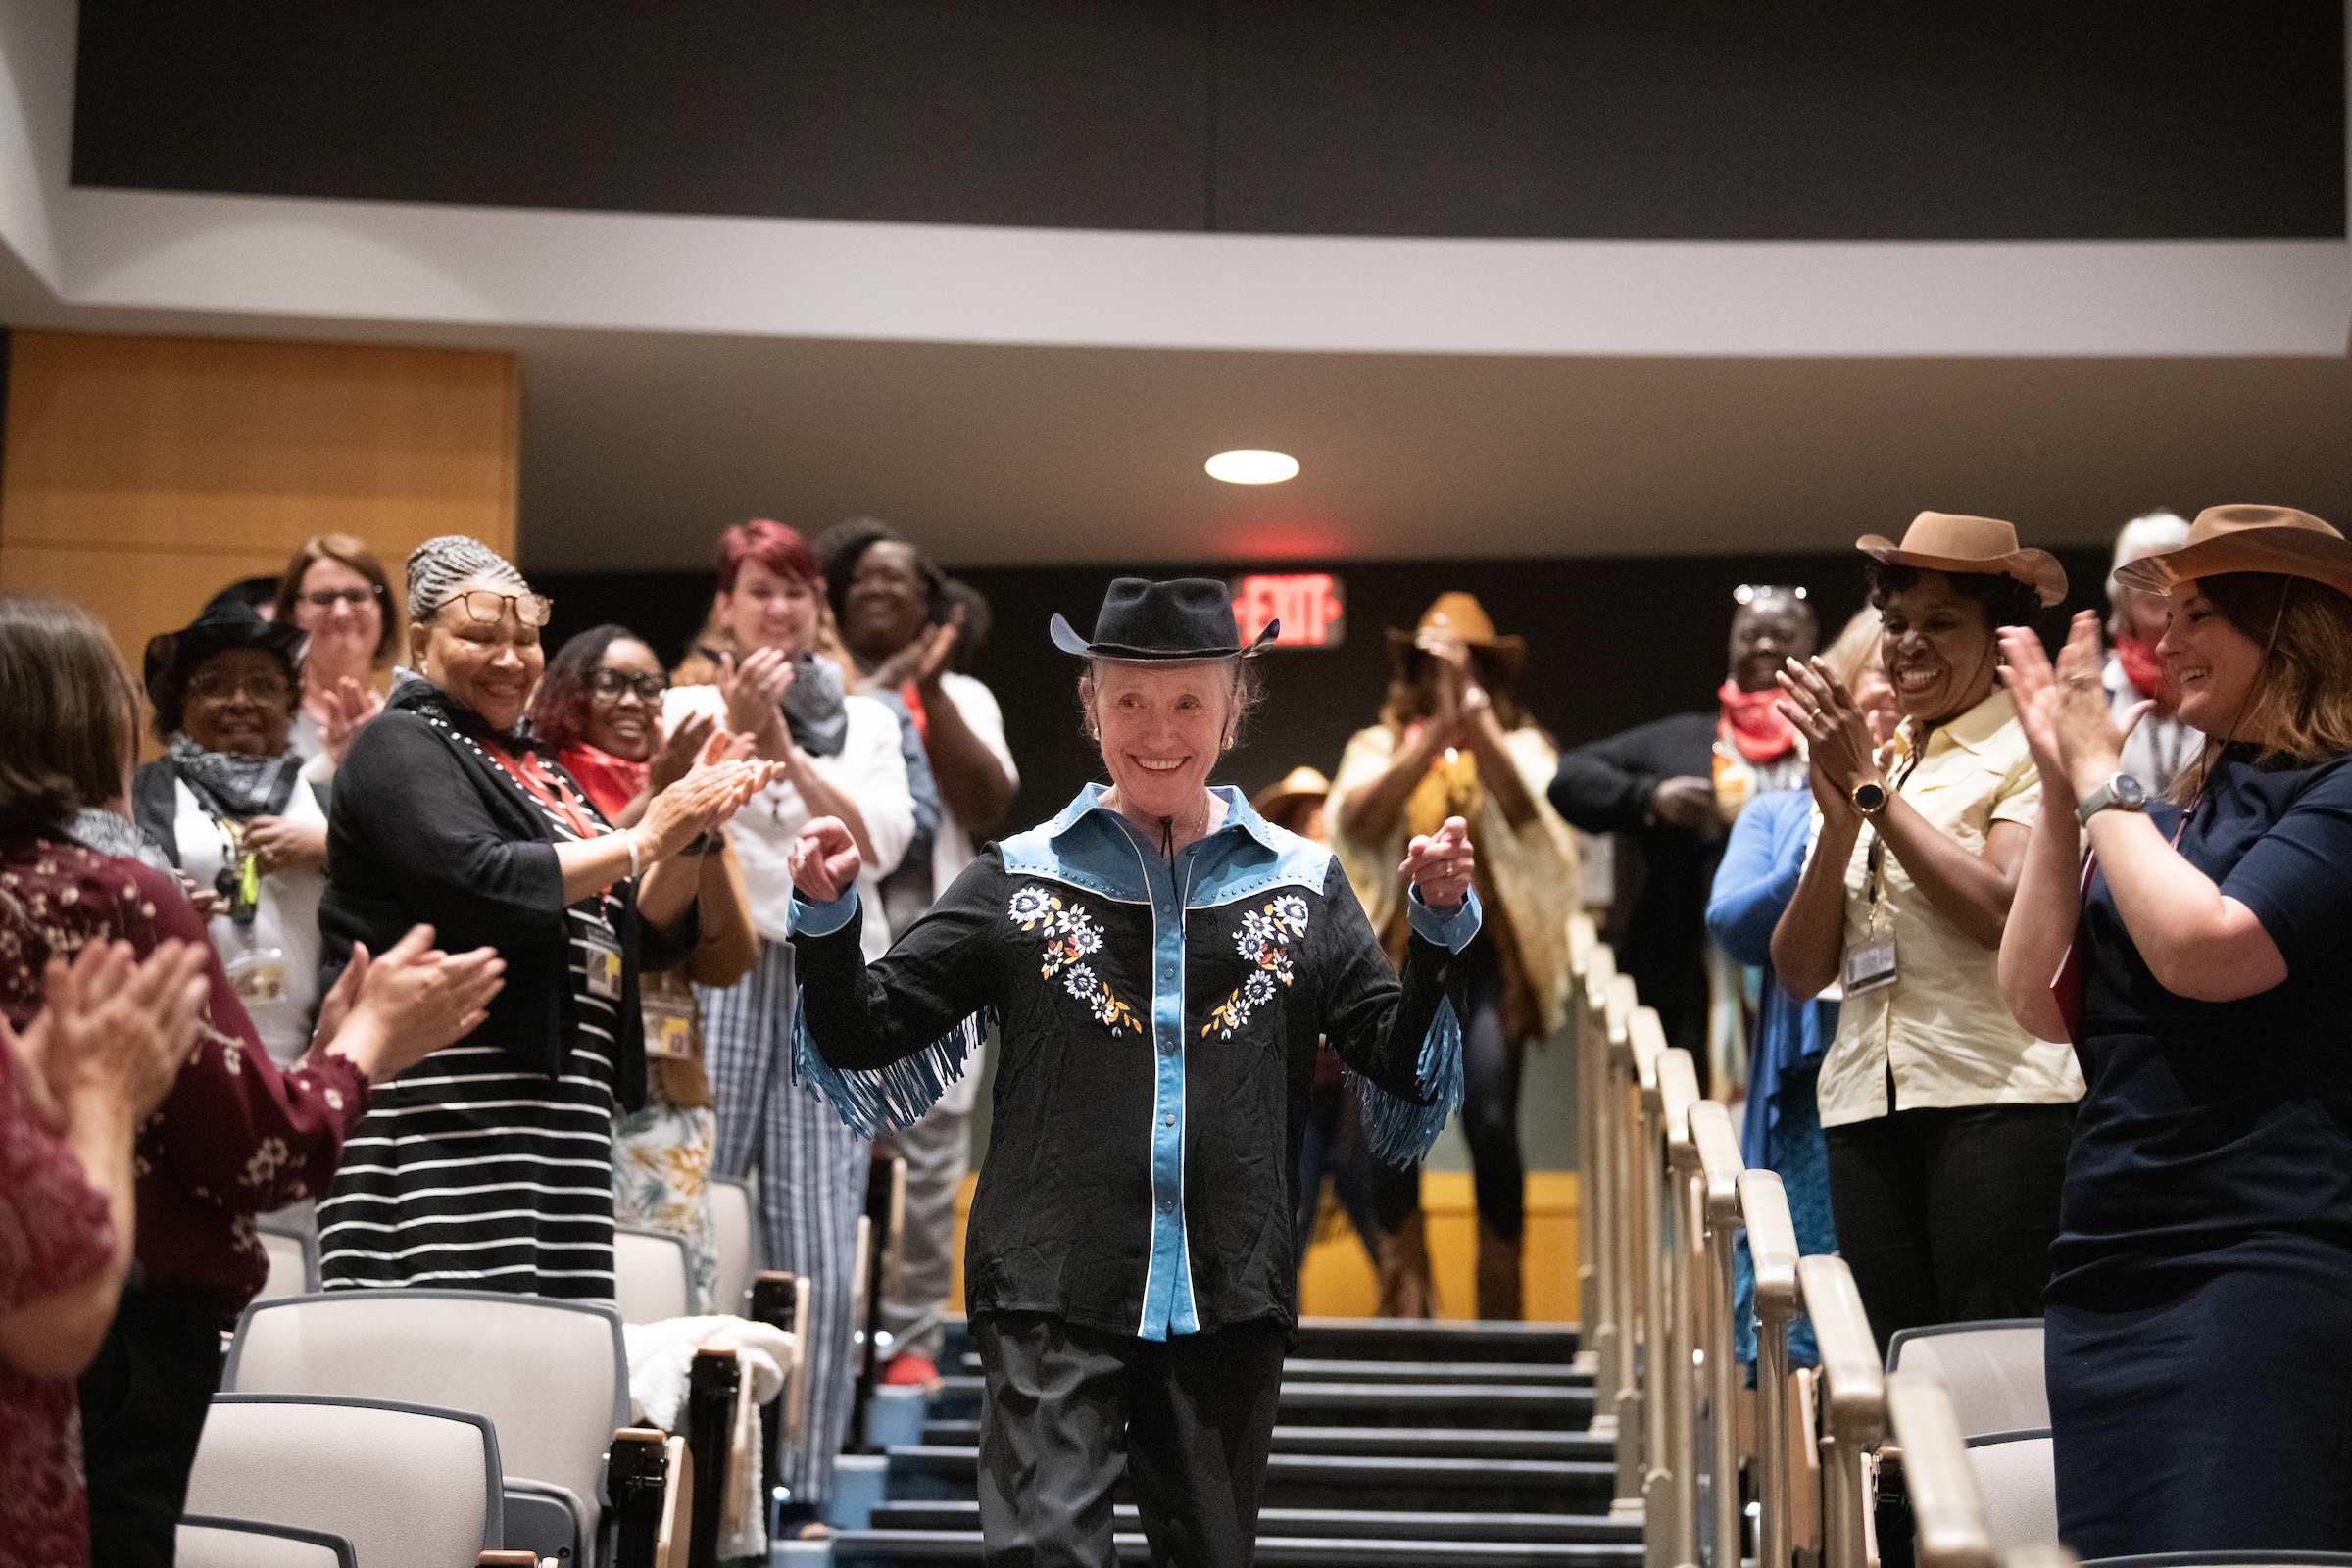 Dean Kirschling dressed in Western gear walking down stairs in auditorium with audience clapping